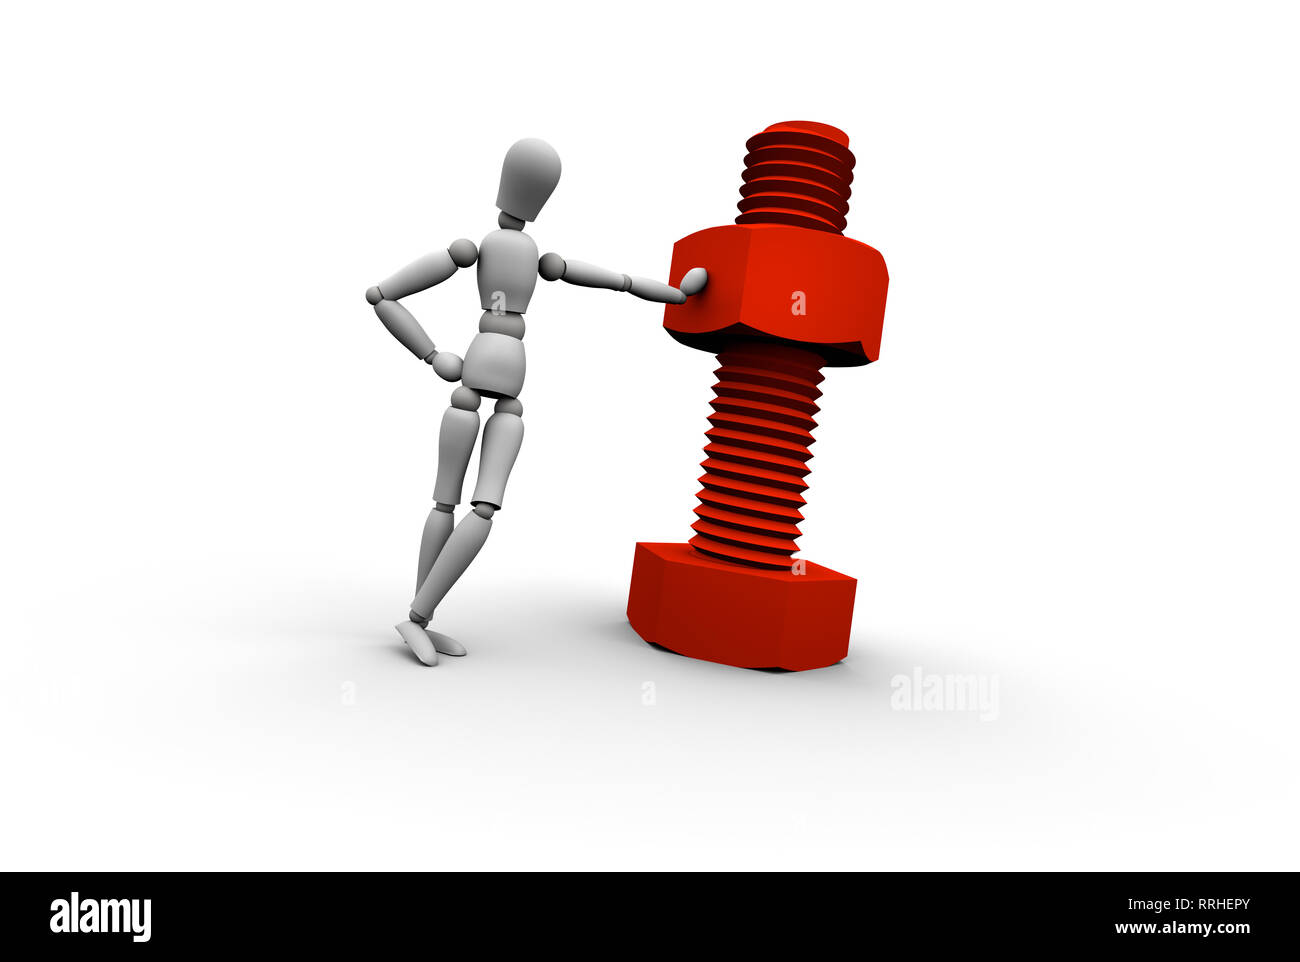 3D mannequin leaning against red nut and bolt. 3D illustration isolated on white background. Stock Photo